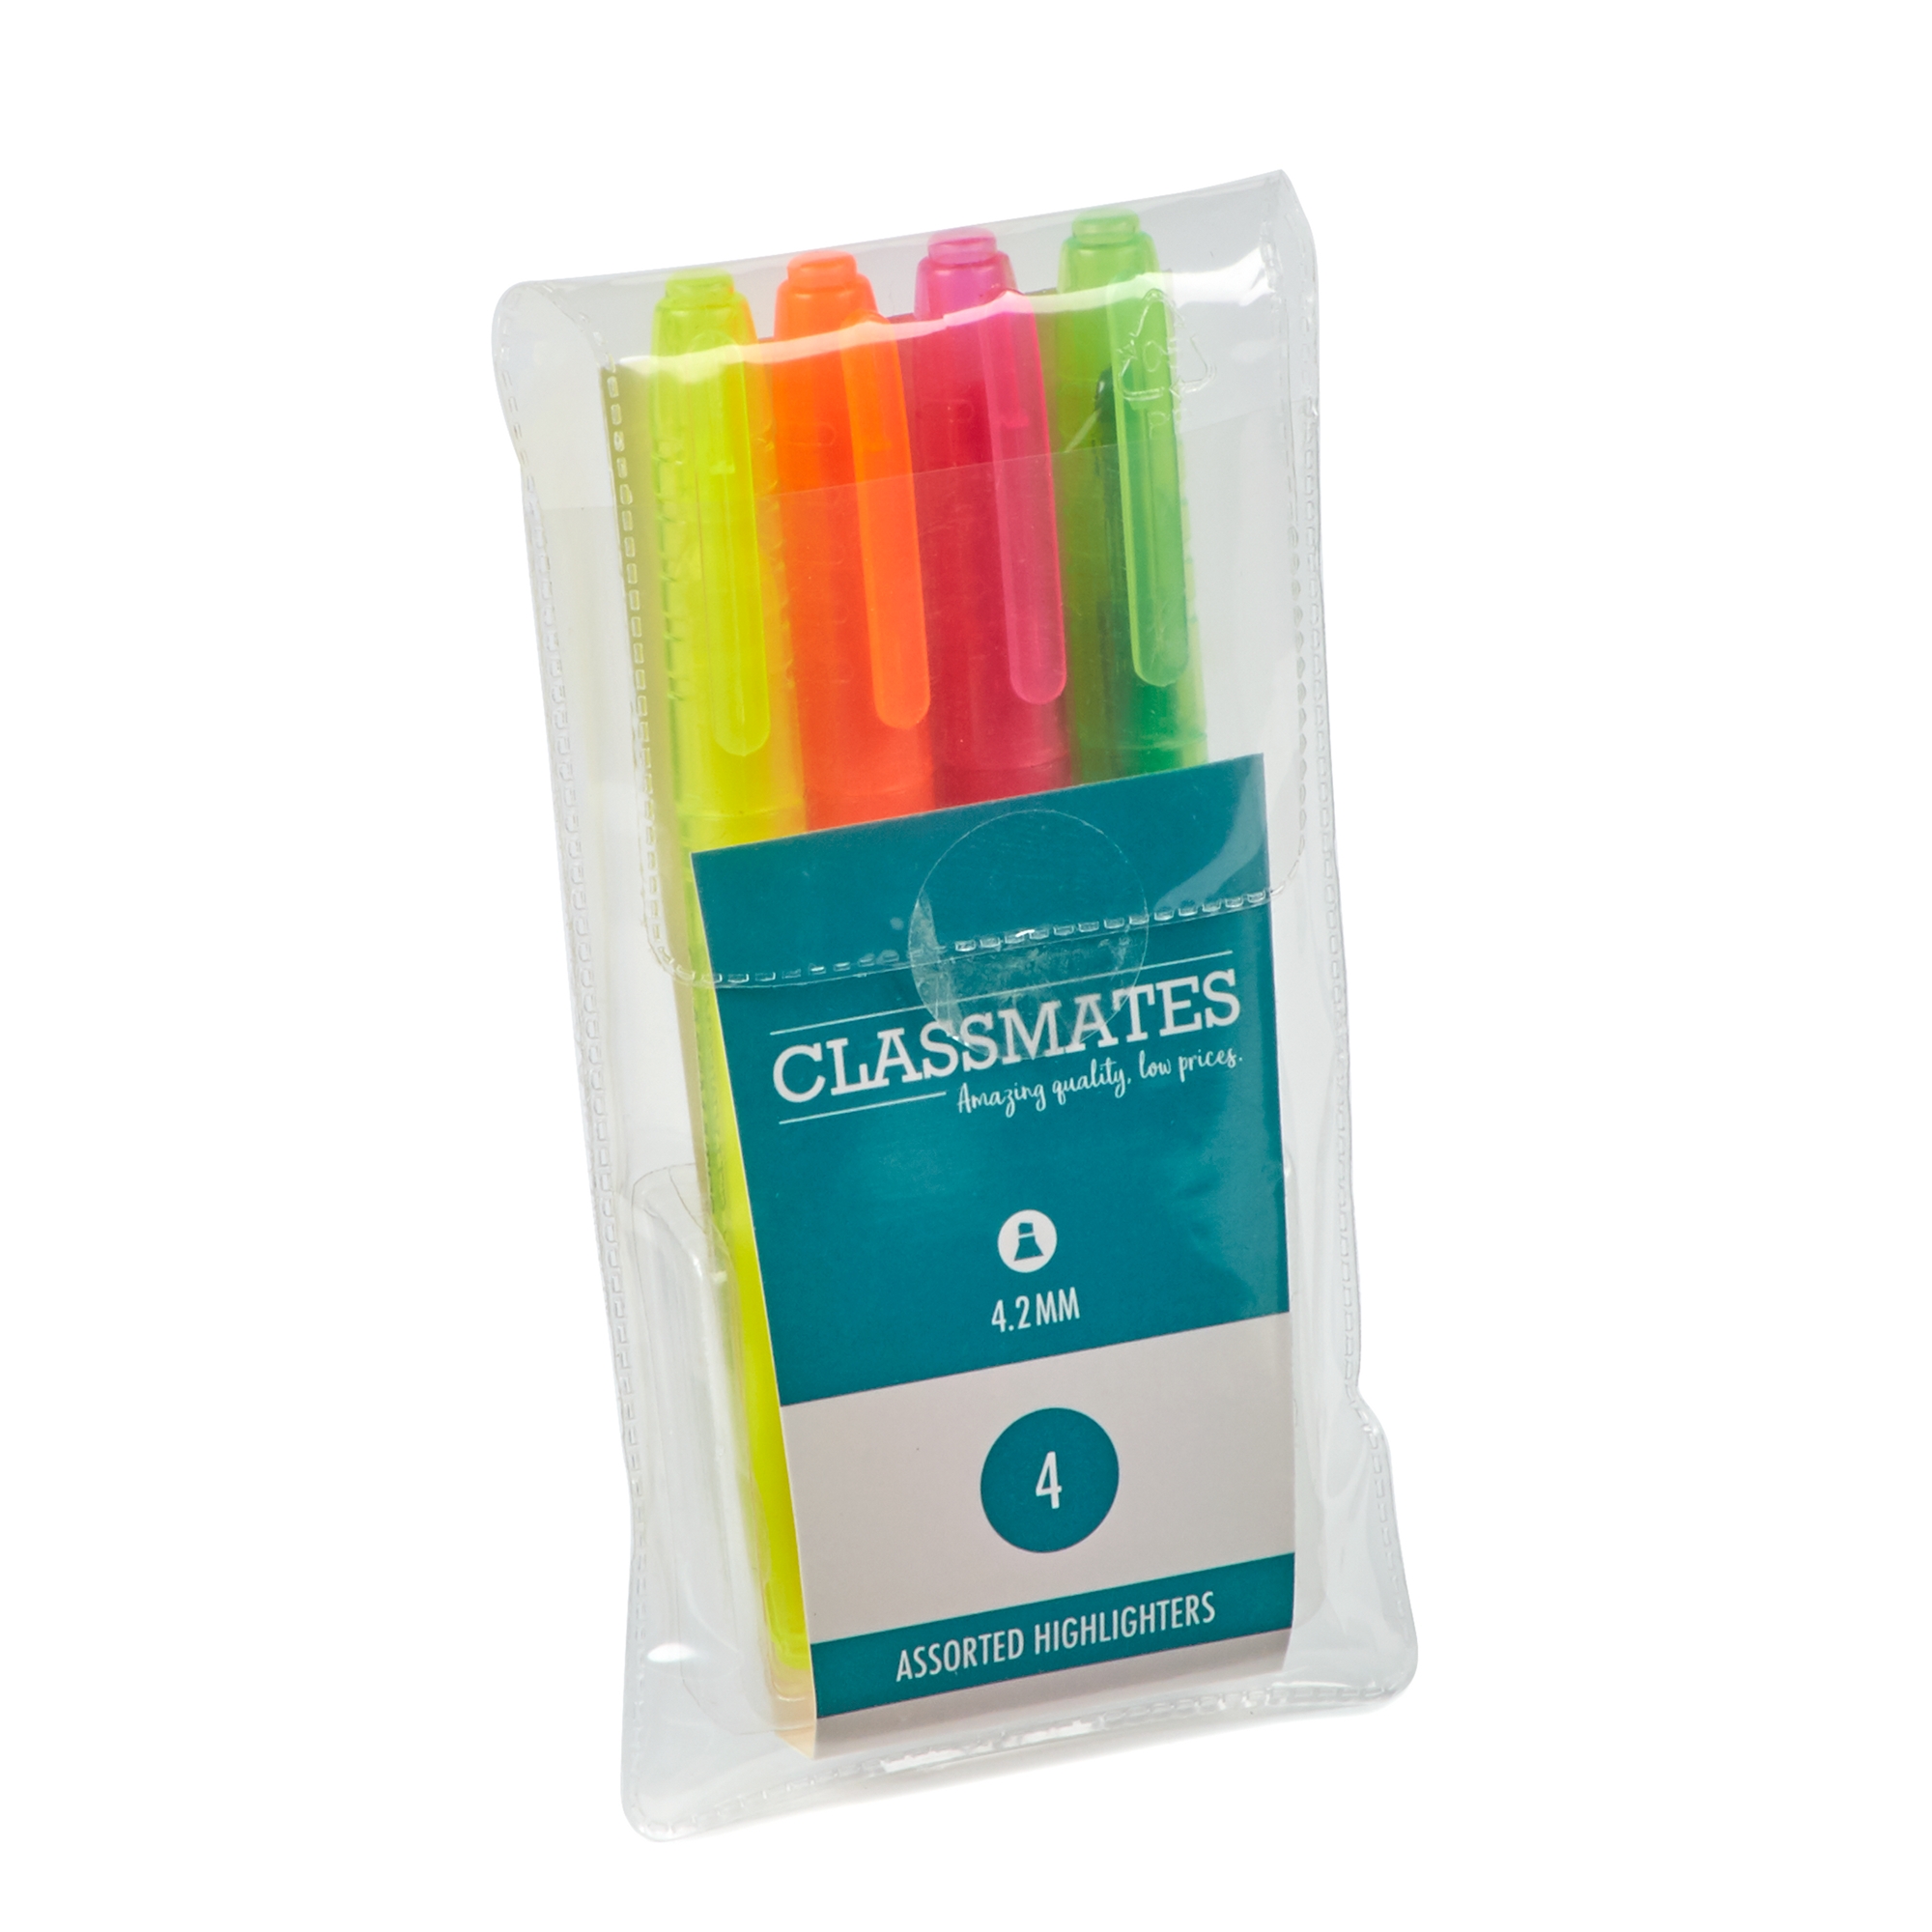 Classmates Highlighter Assorted - Pack of 4